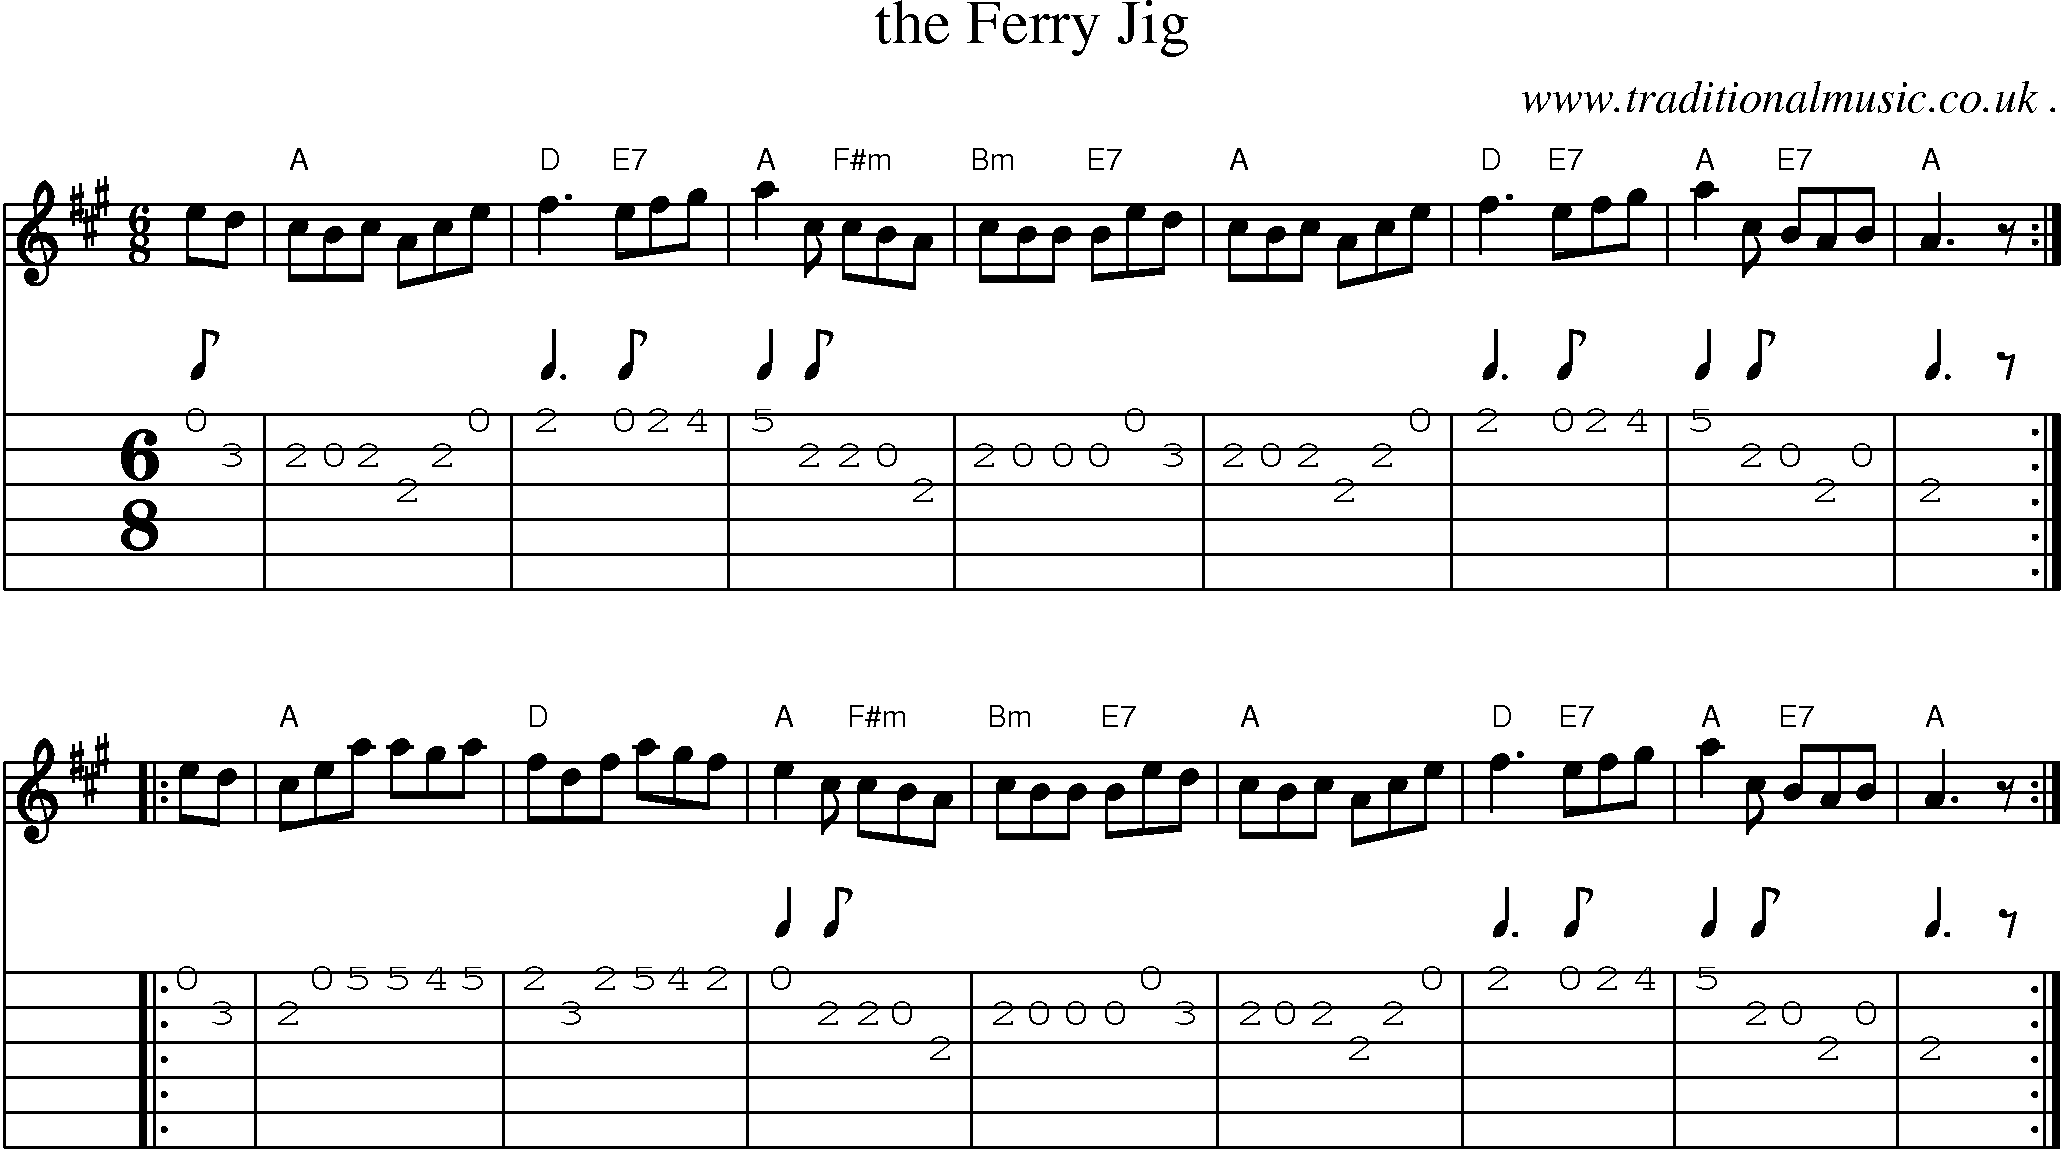 Sheet-music  score, Chords and Guitar Tabs for The Ferry Jig